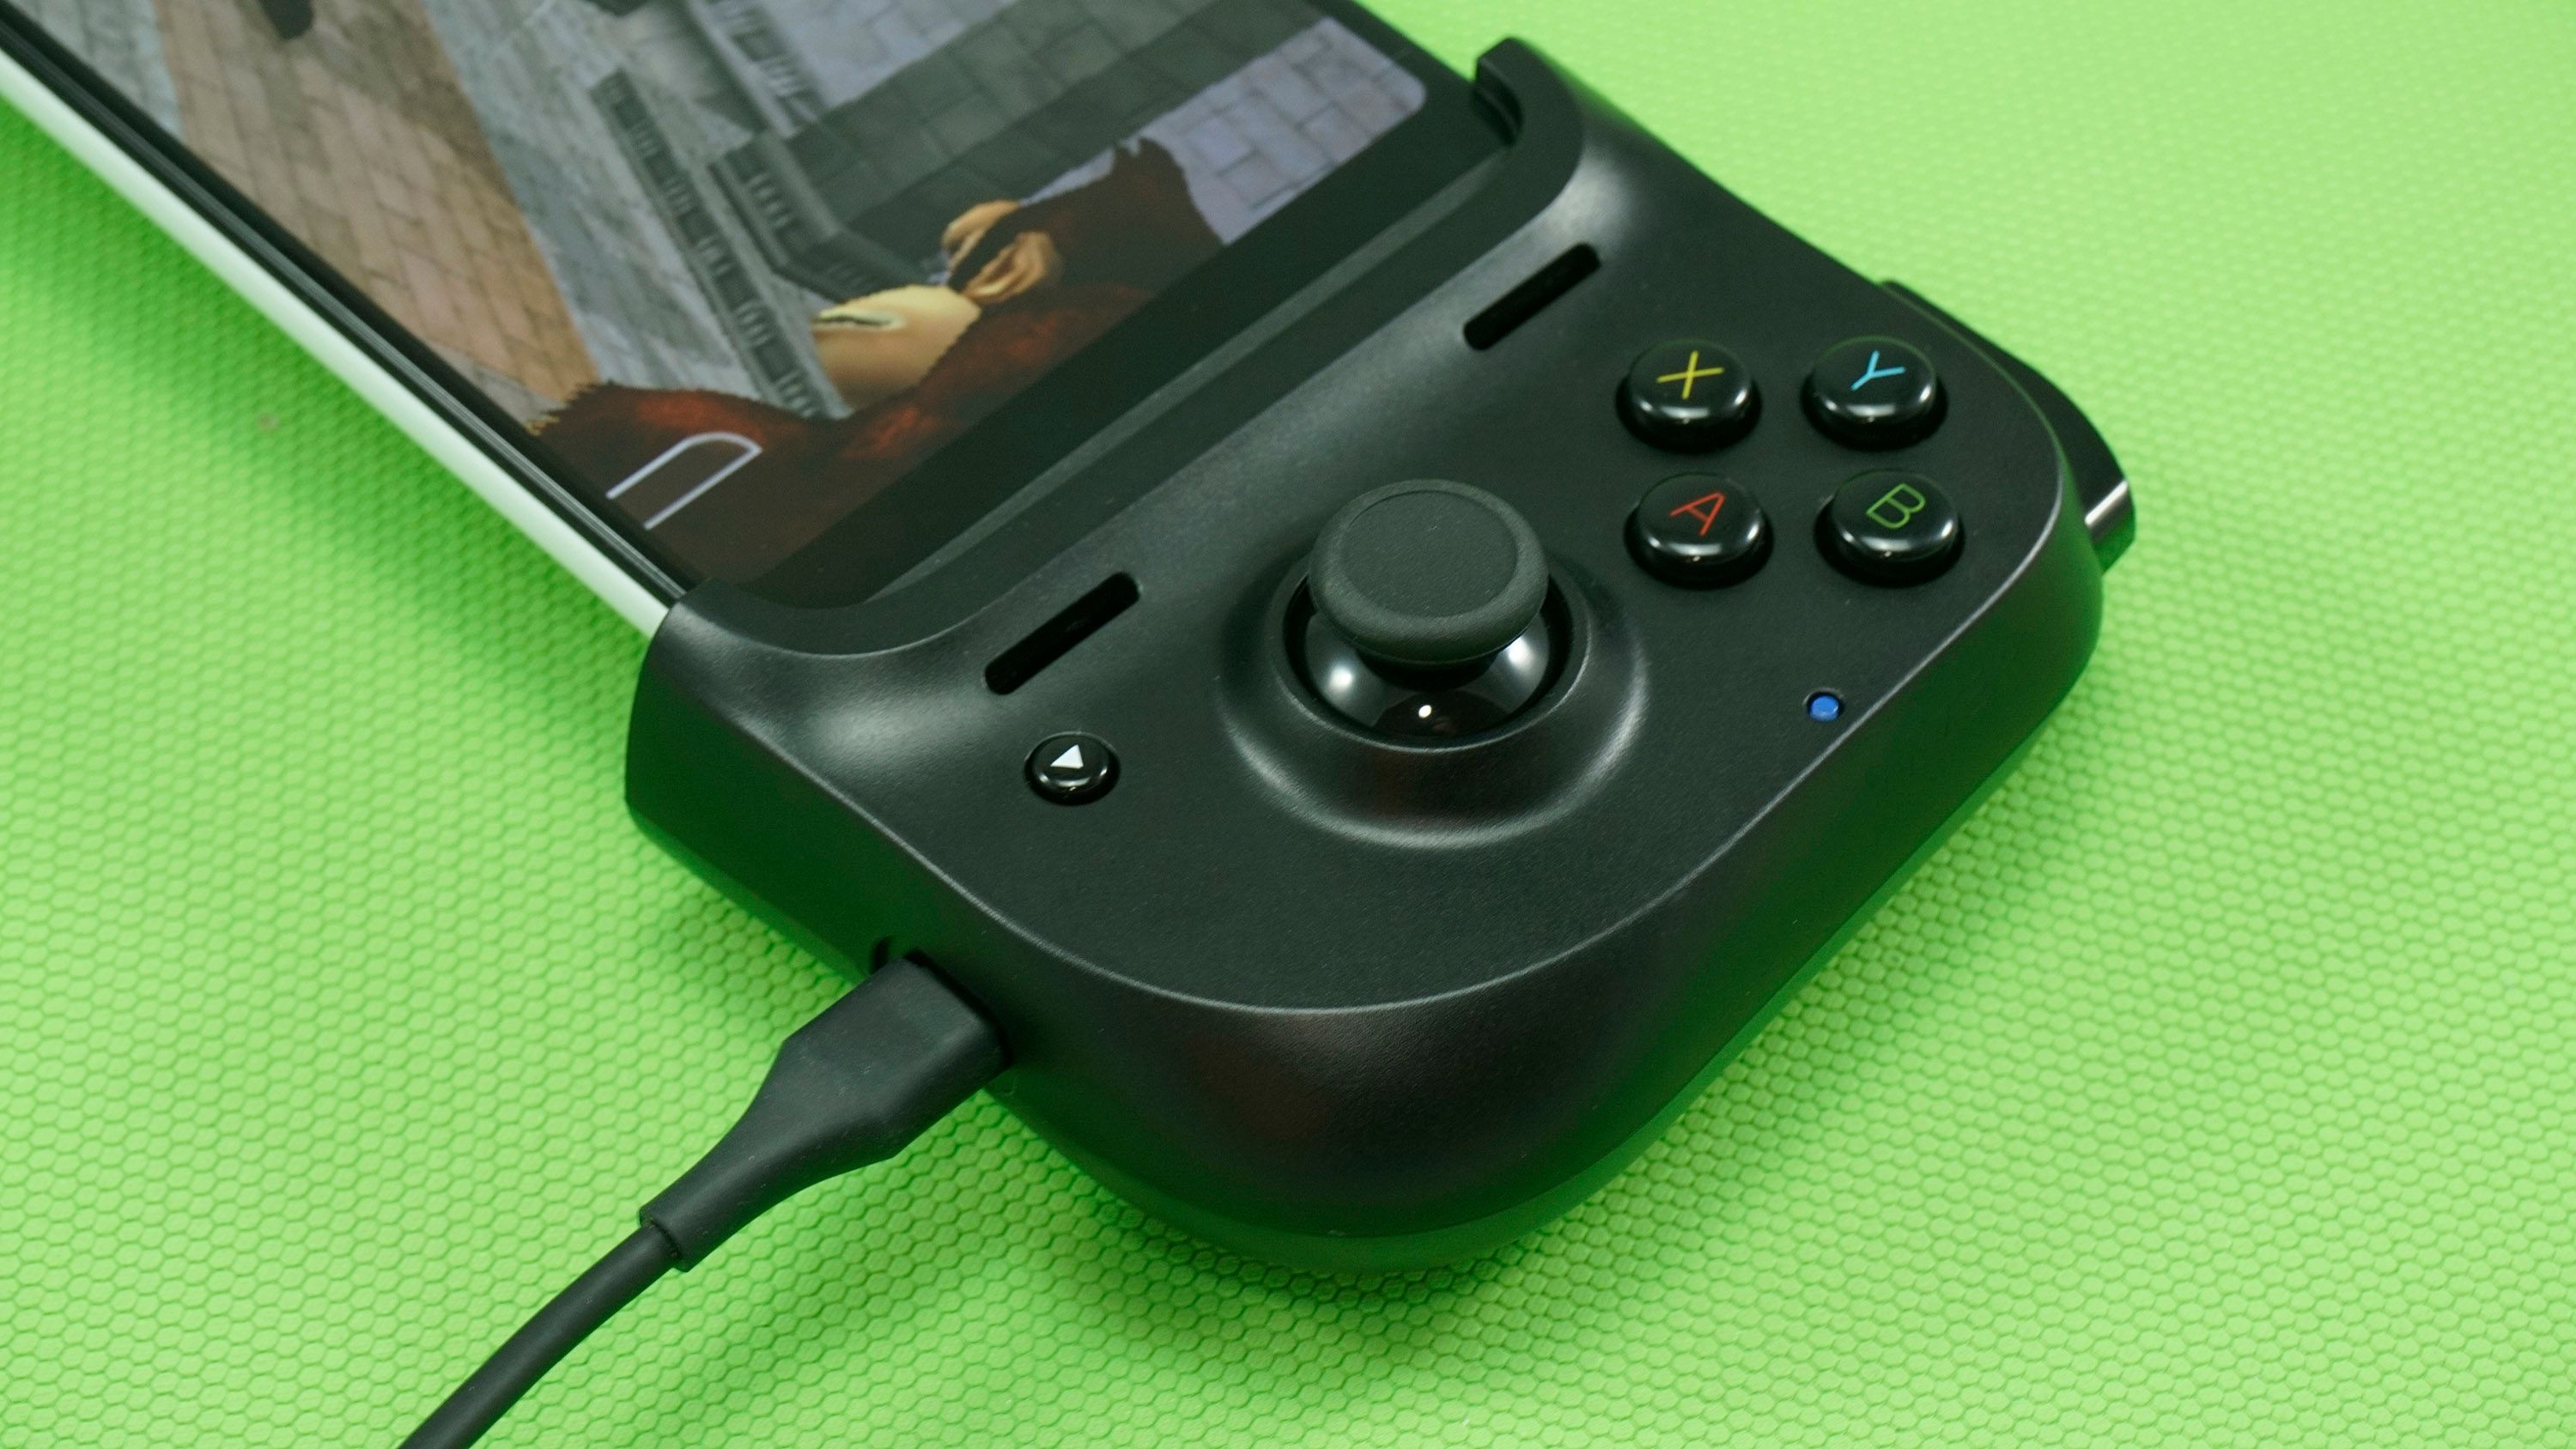 Razer Kishi review: The ultimate controller for mobile gaming